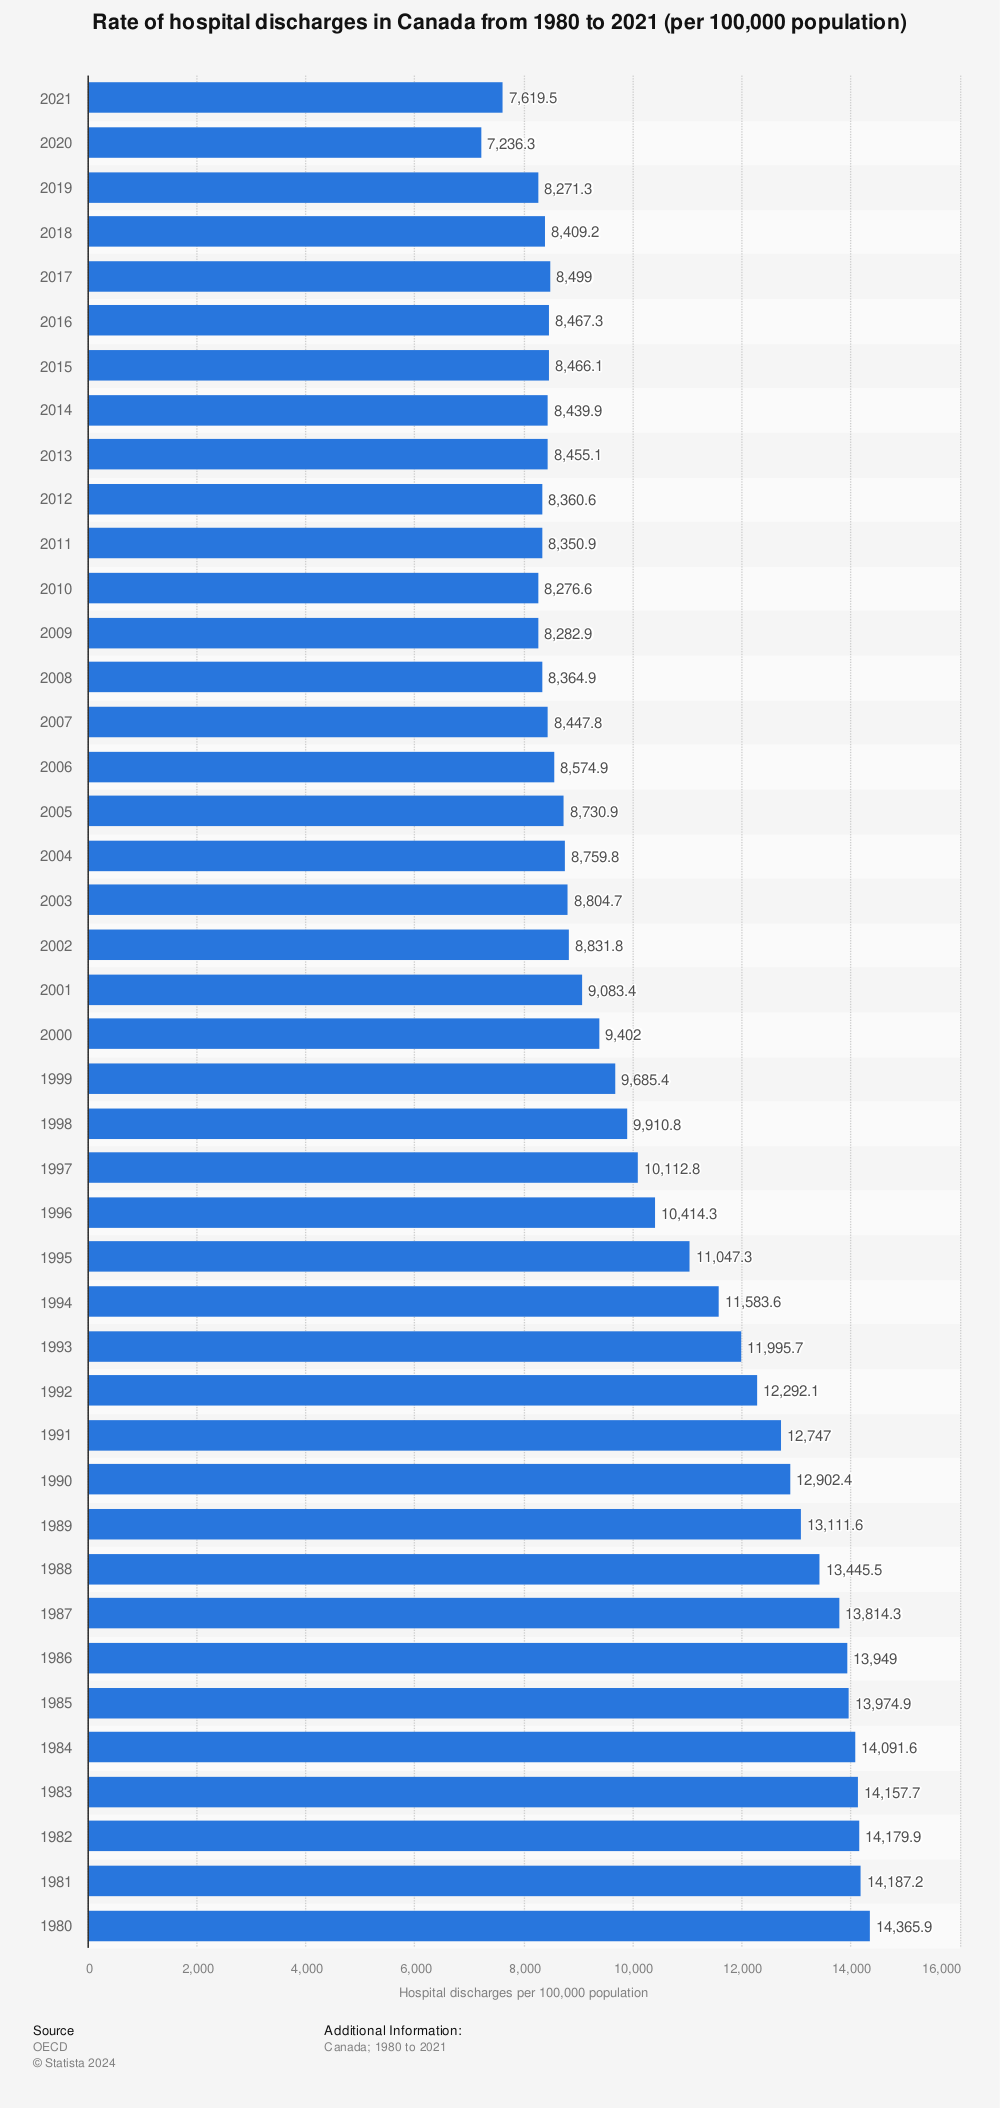 Statistic: Rate of hospital discharges in Canada from 1980 to 2021 (per 100,000 population) | Statista